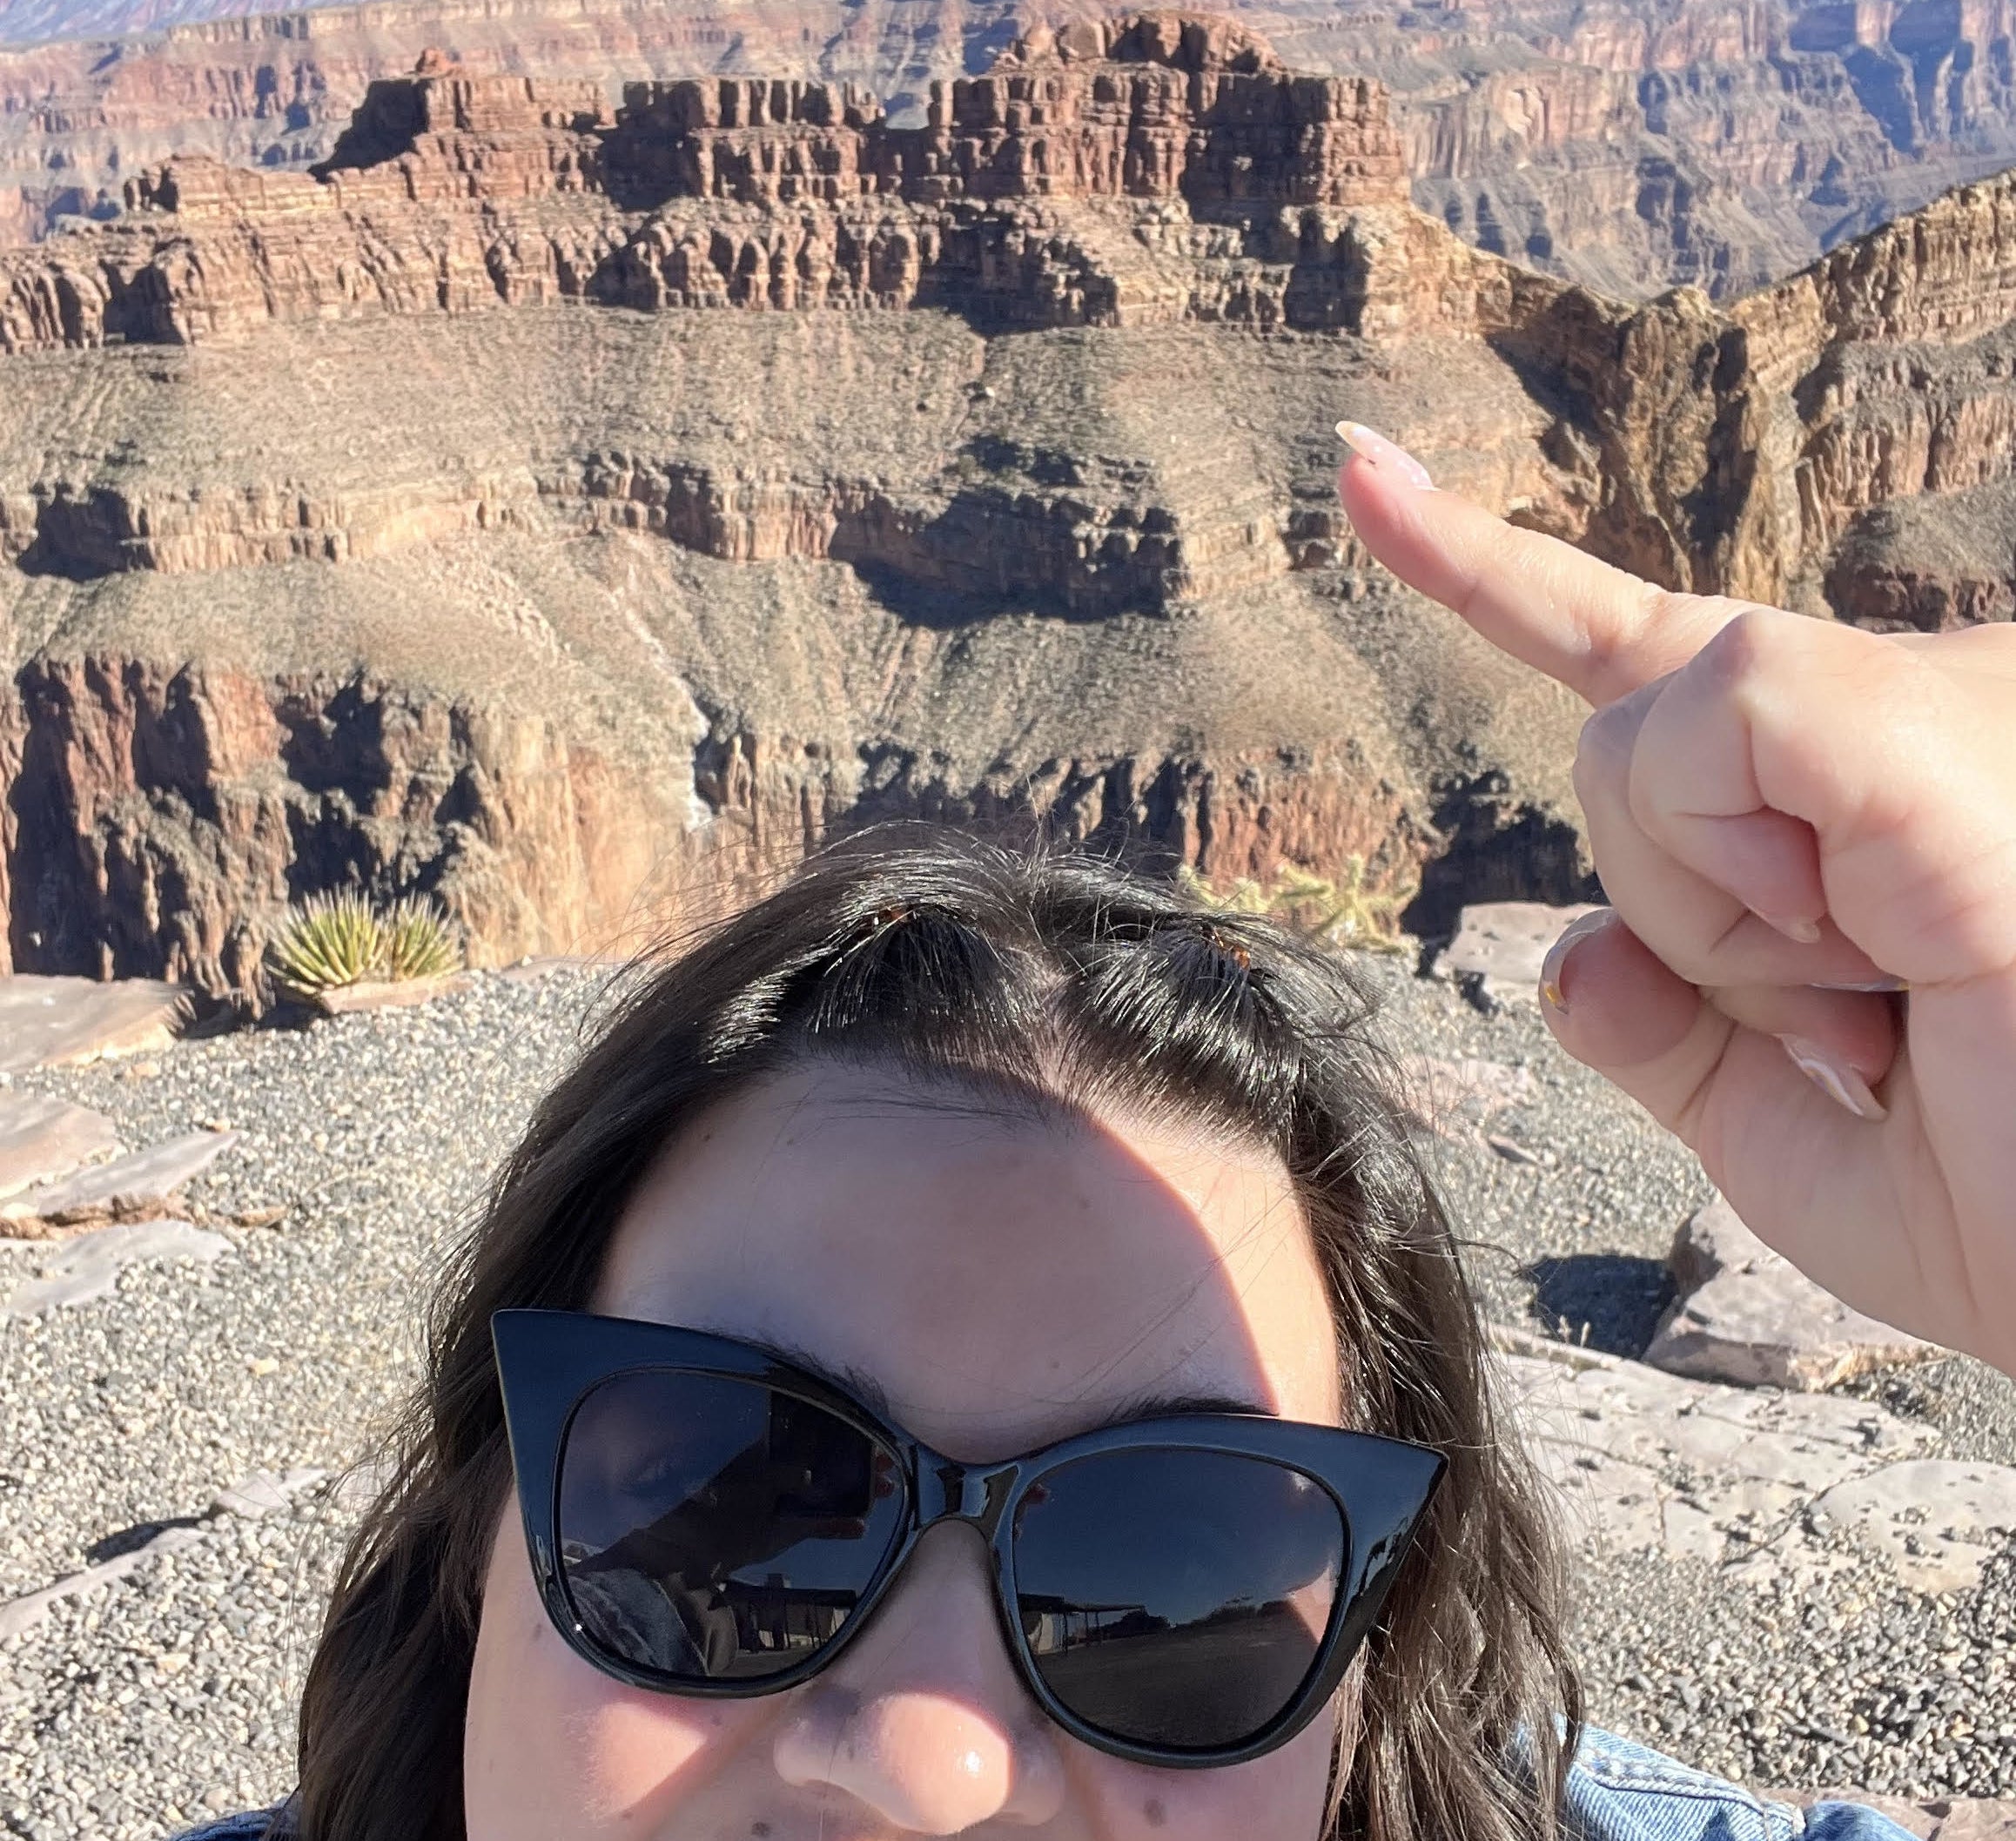 Bianca wearing the sunglasses in front of the Grand Canyon